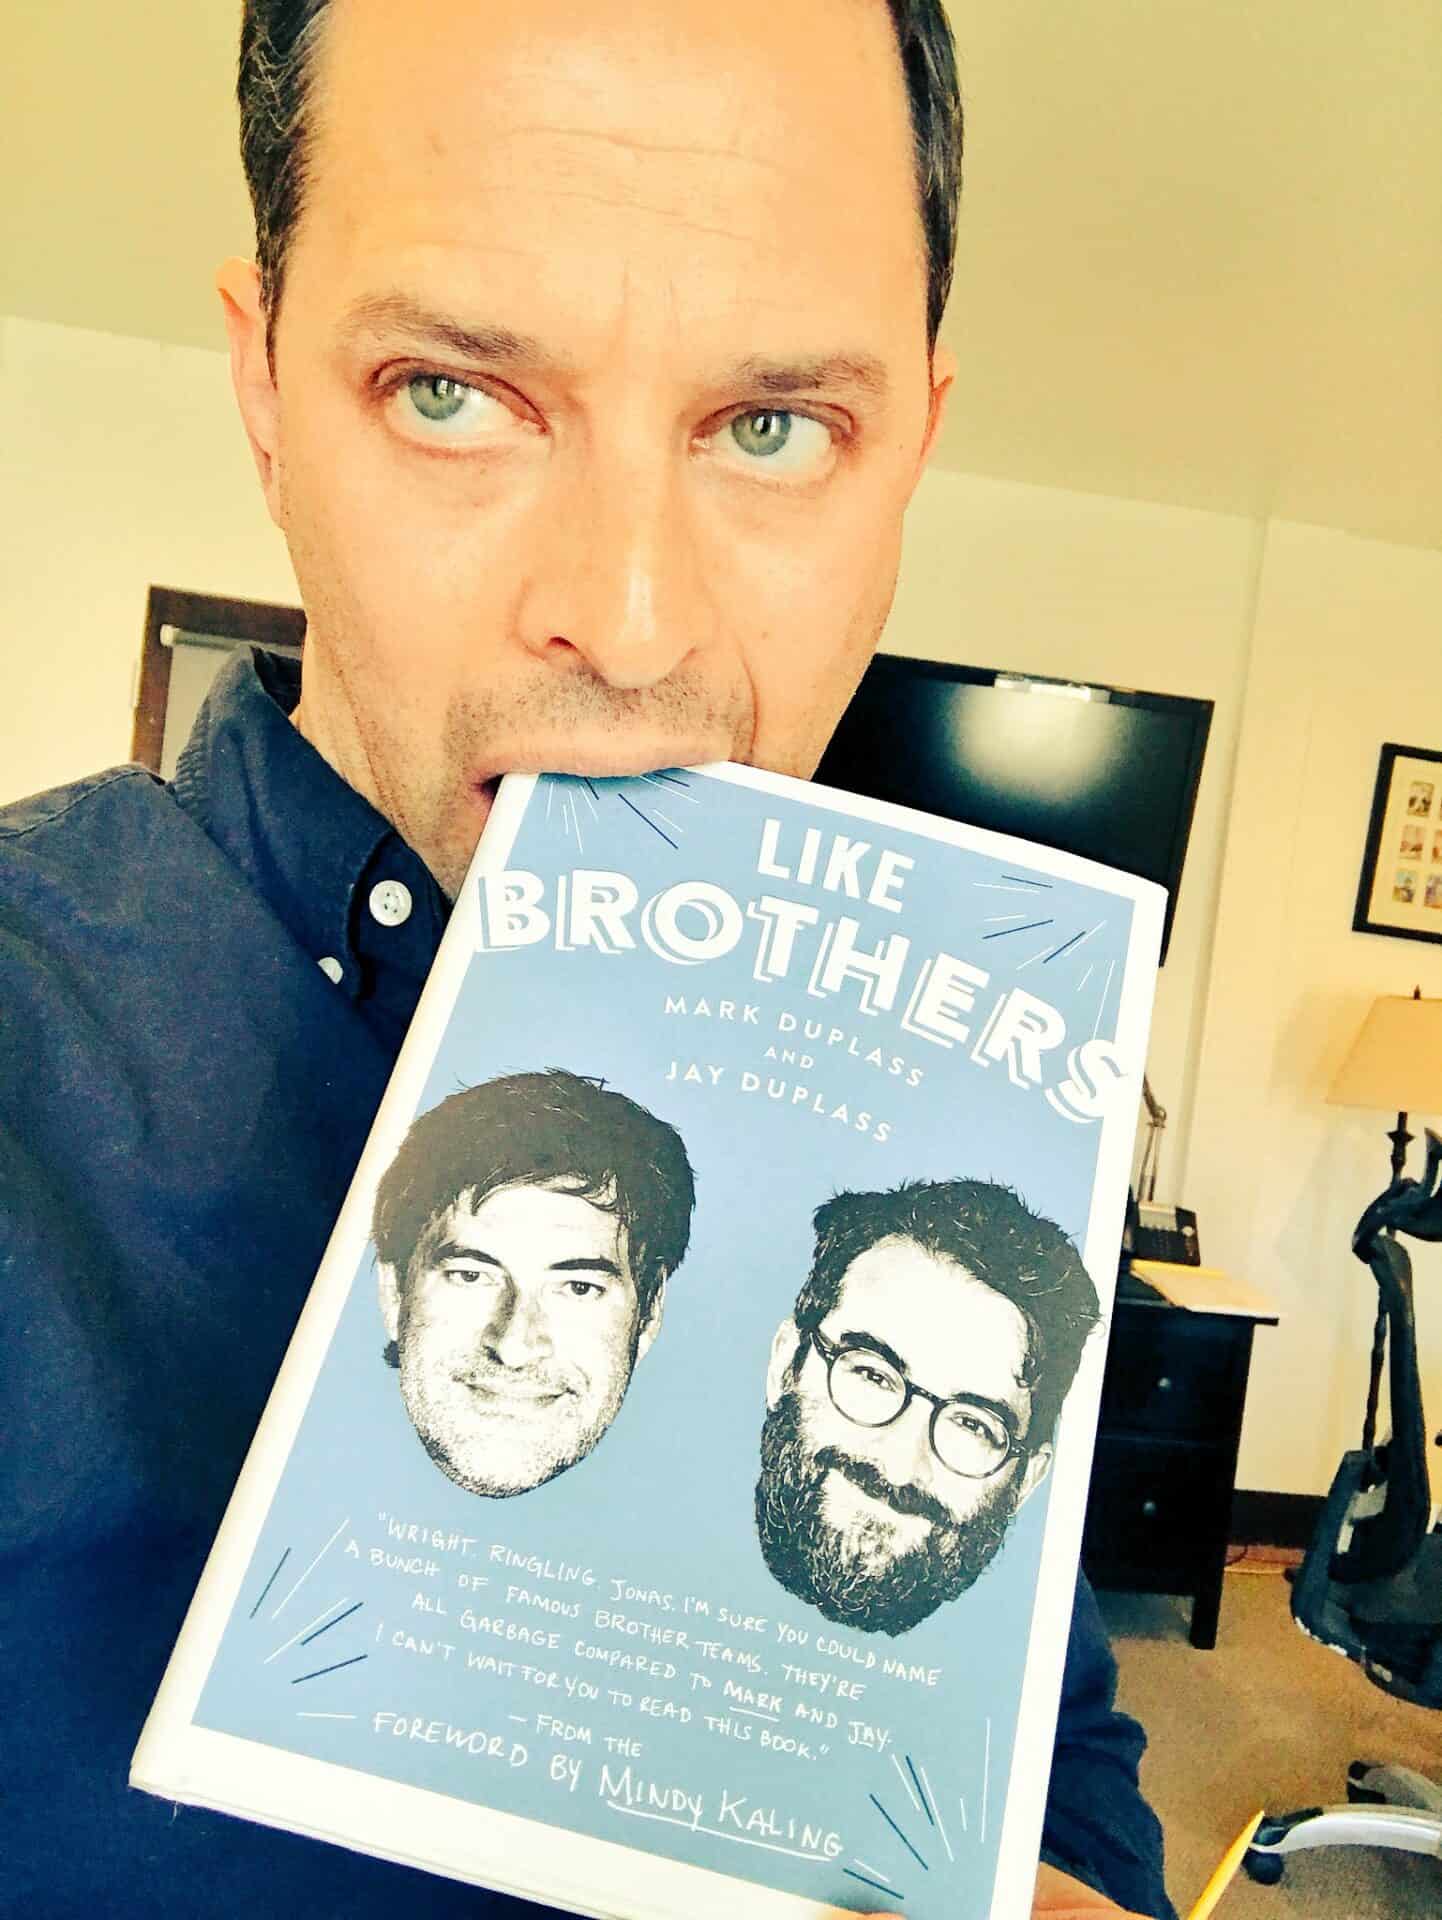 Nick Kroll publishes his book